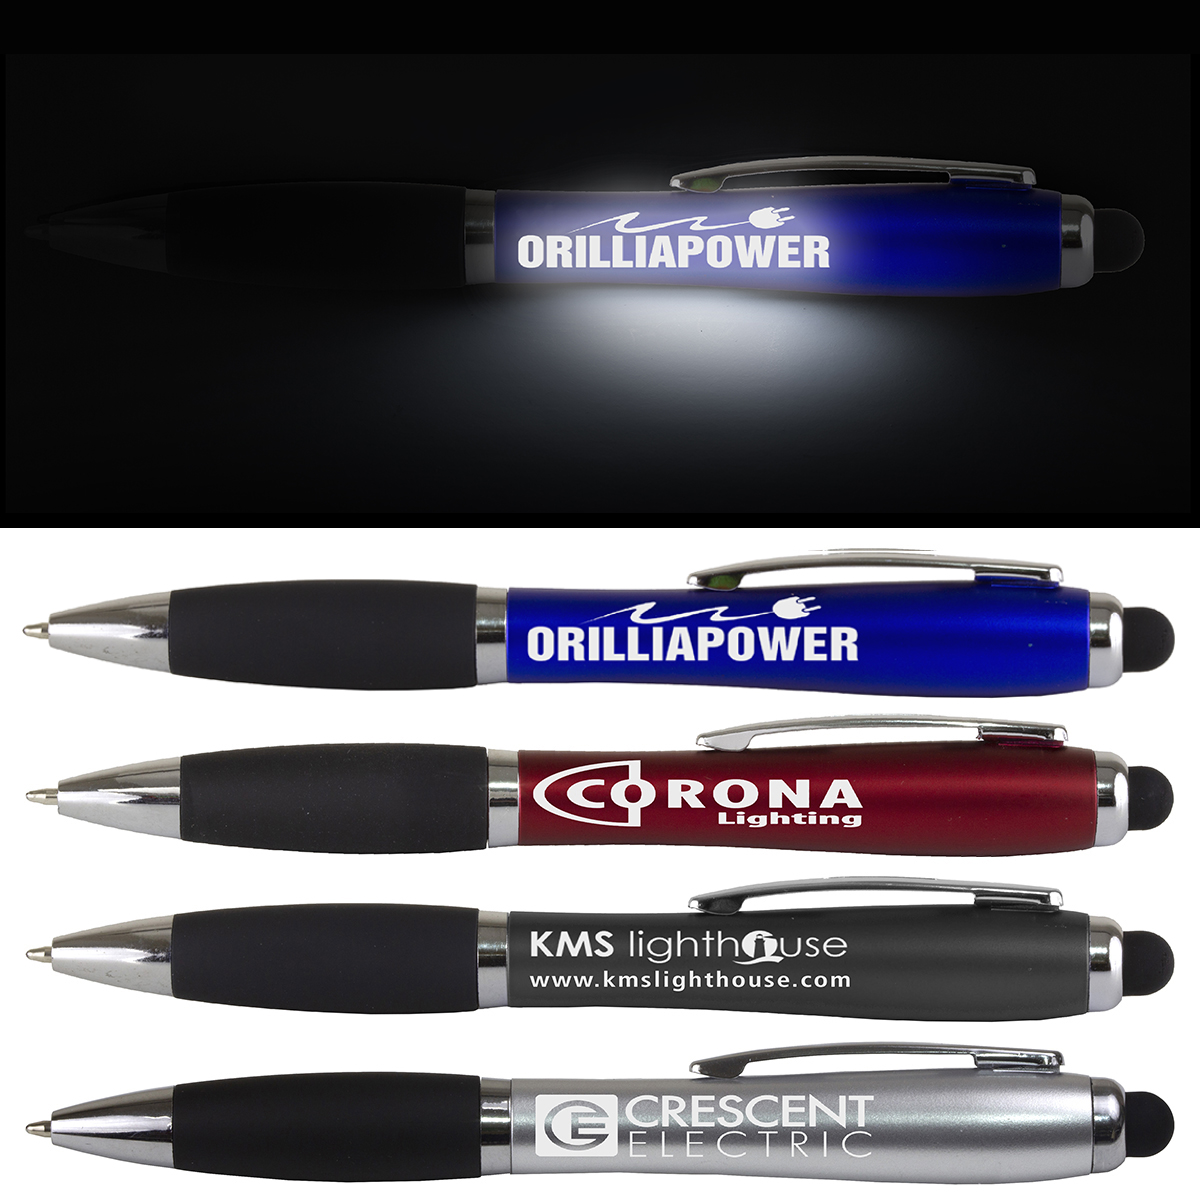 Custom Laser-Engraved Metal Ballpoint Stylus Pens With Illuminated Engraving & Soft Glowing Silicone Grip Stylus Tip Works with All Touchscreen Devices. Available in 5 Colors